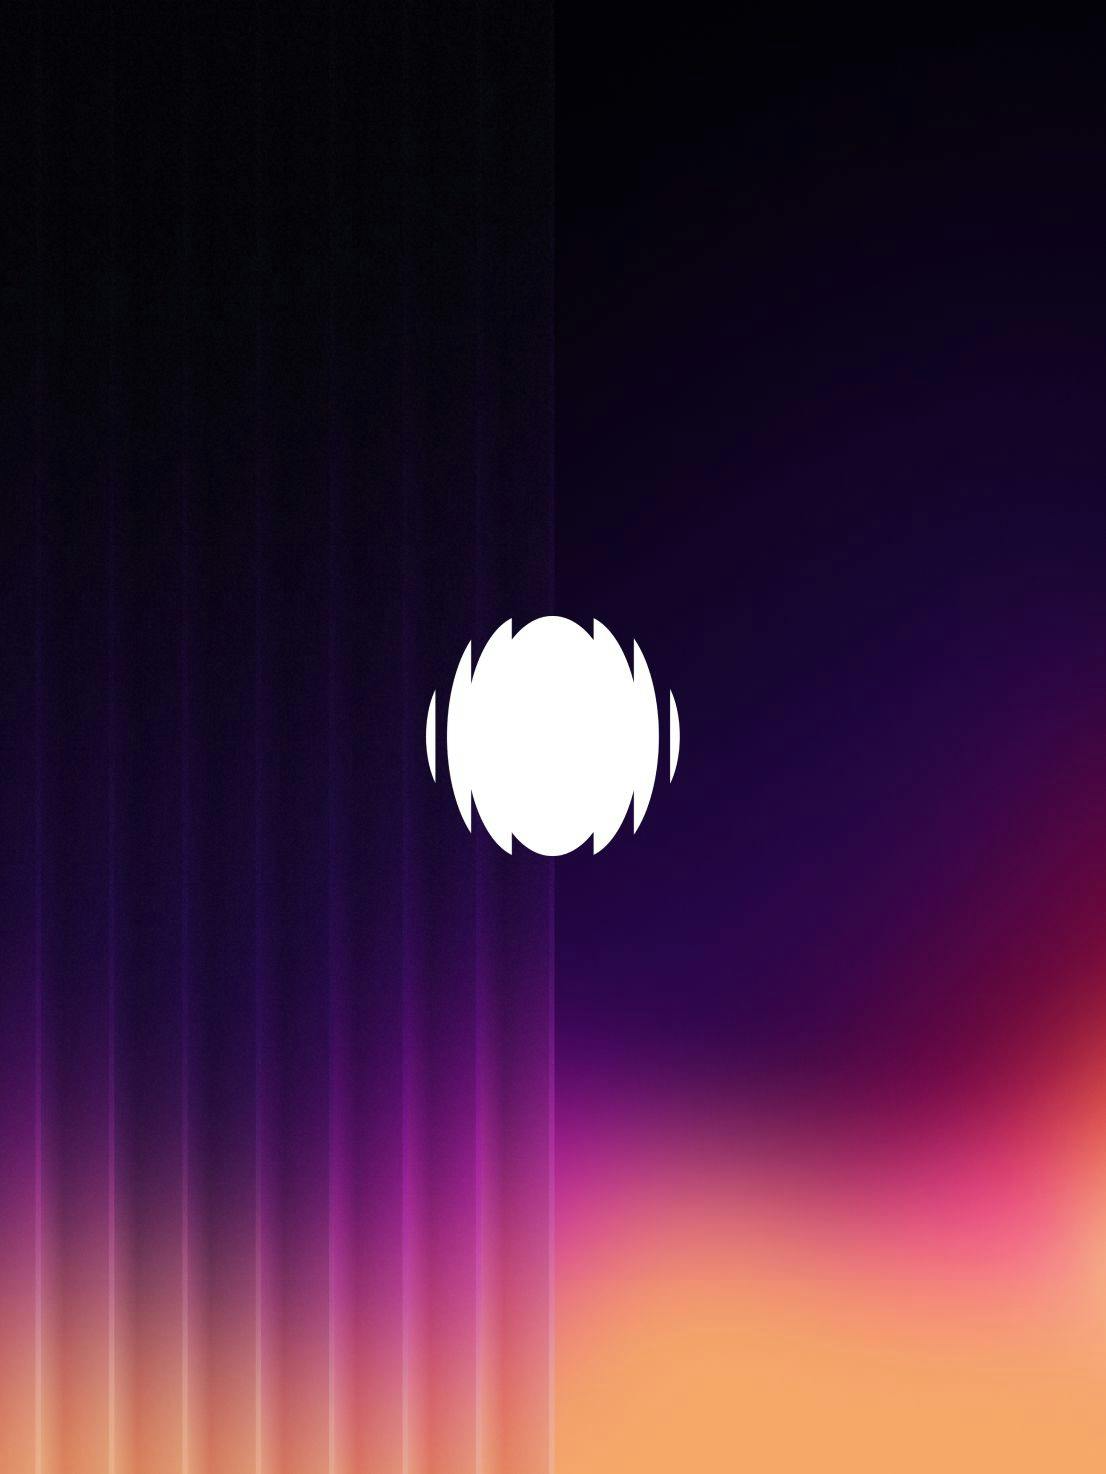 Aila icon on top of a gradient background made of purple, pink and orange colors with fractal glass effect